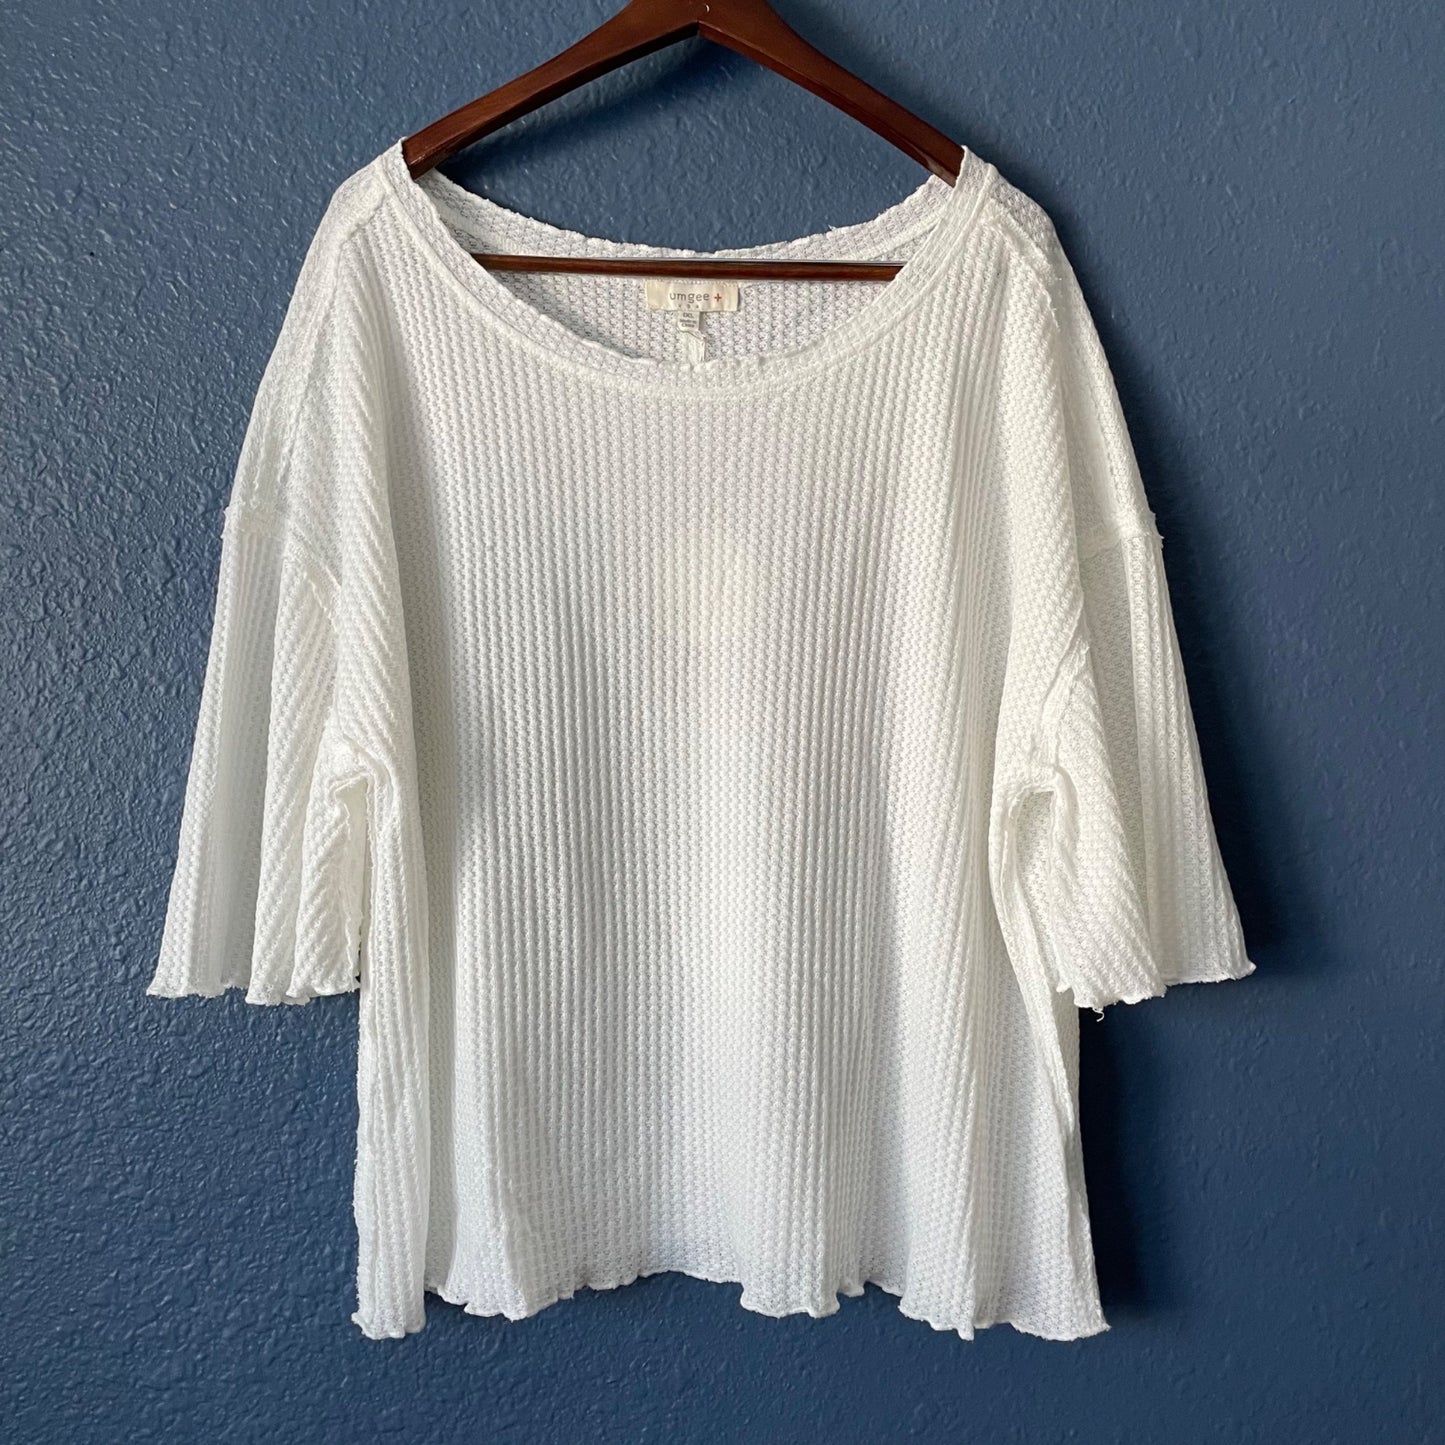 NWT Umgee White Ruffle Sleeve Ribbed Oversize Top Women's Size 1XL 90's Y2K